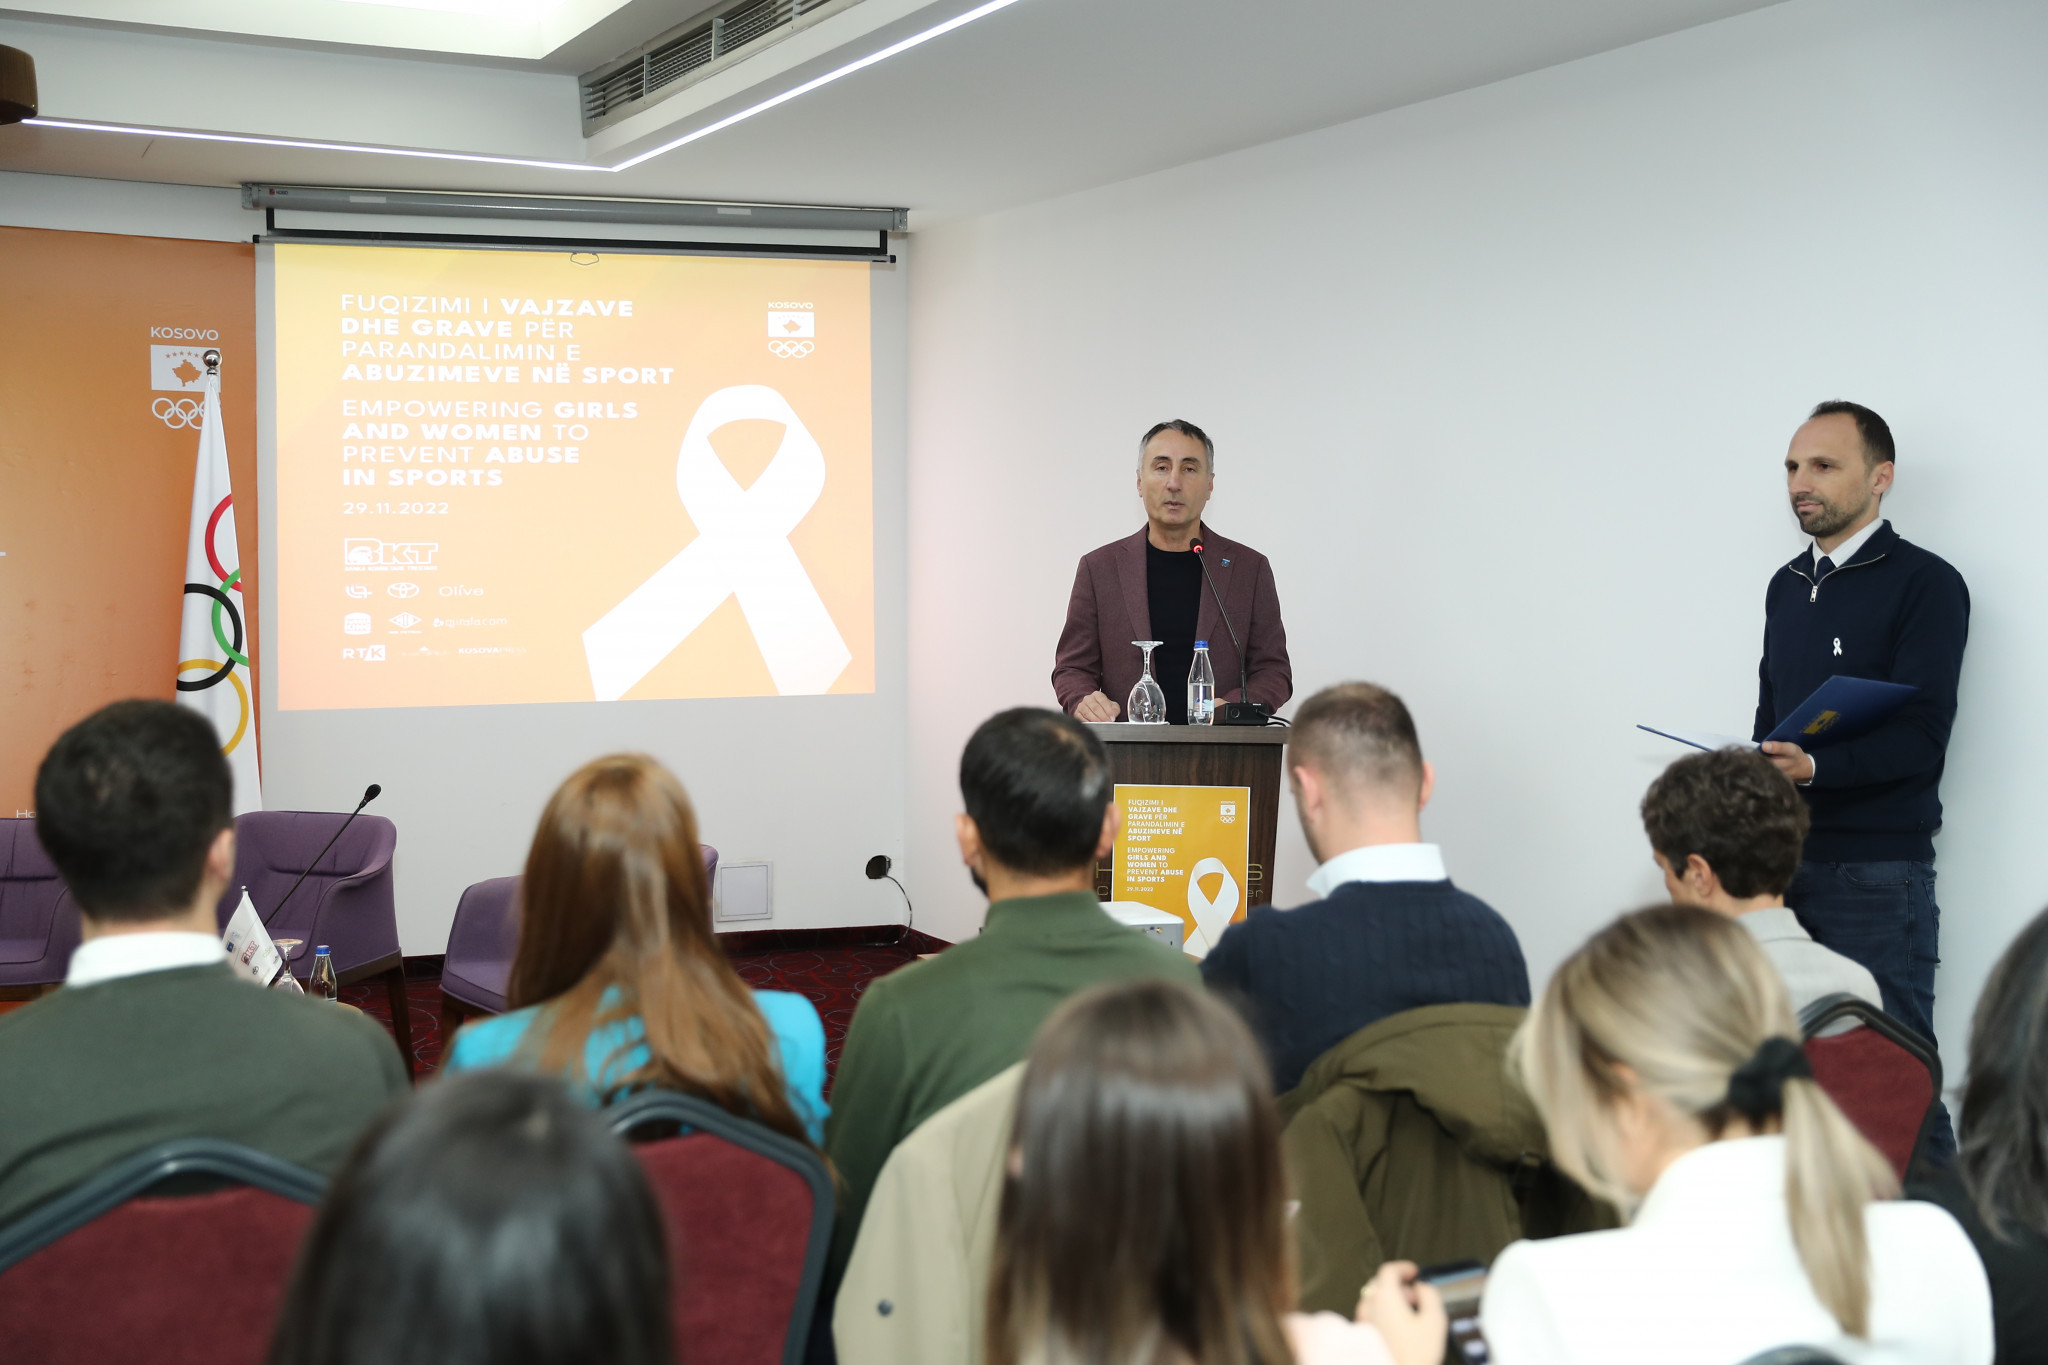 Ismet Krasniqi expressed his support for fighting abuse in sport ©KOC